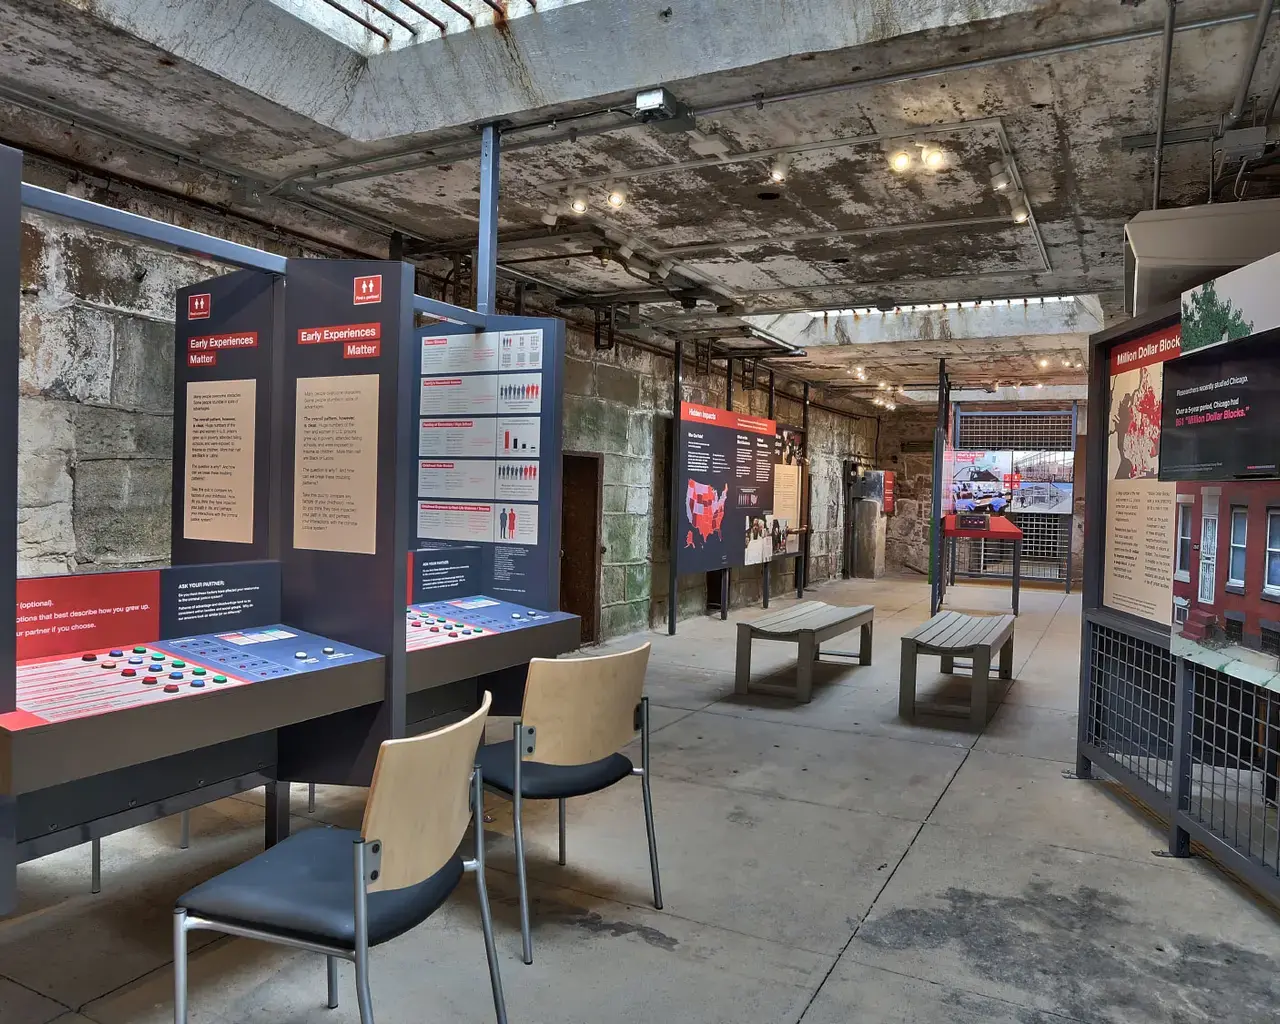 Installation view of Prisons Today: Questions in the Age of Mass Incarceration. Photo by Darryl W. Moran.